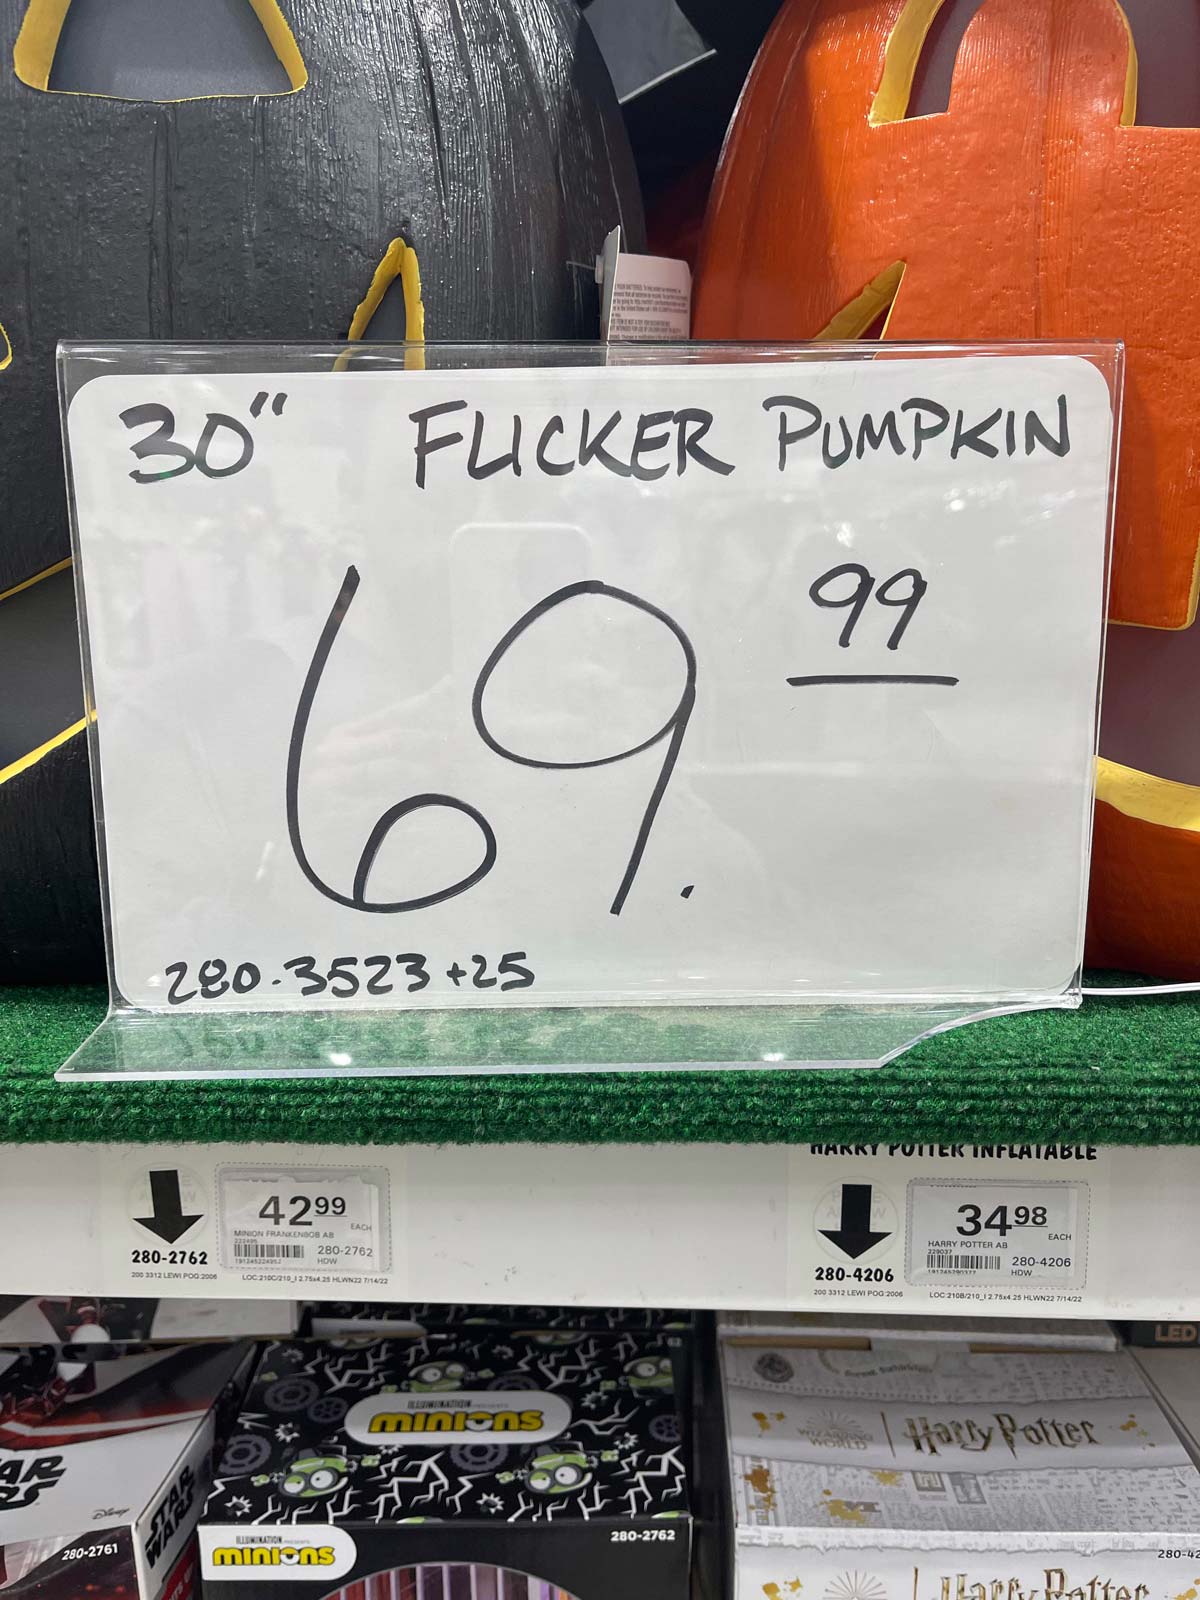 The perfect price for the perfect pumpkin